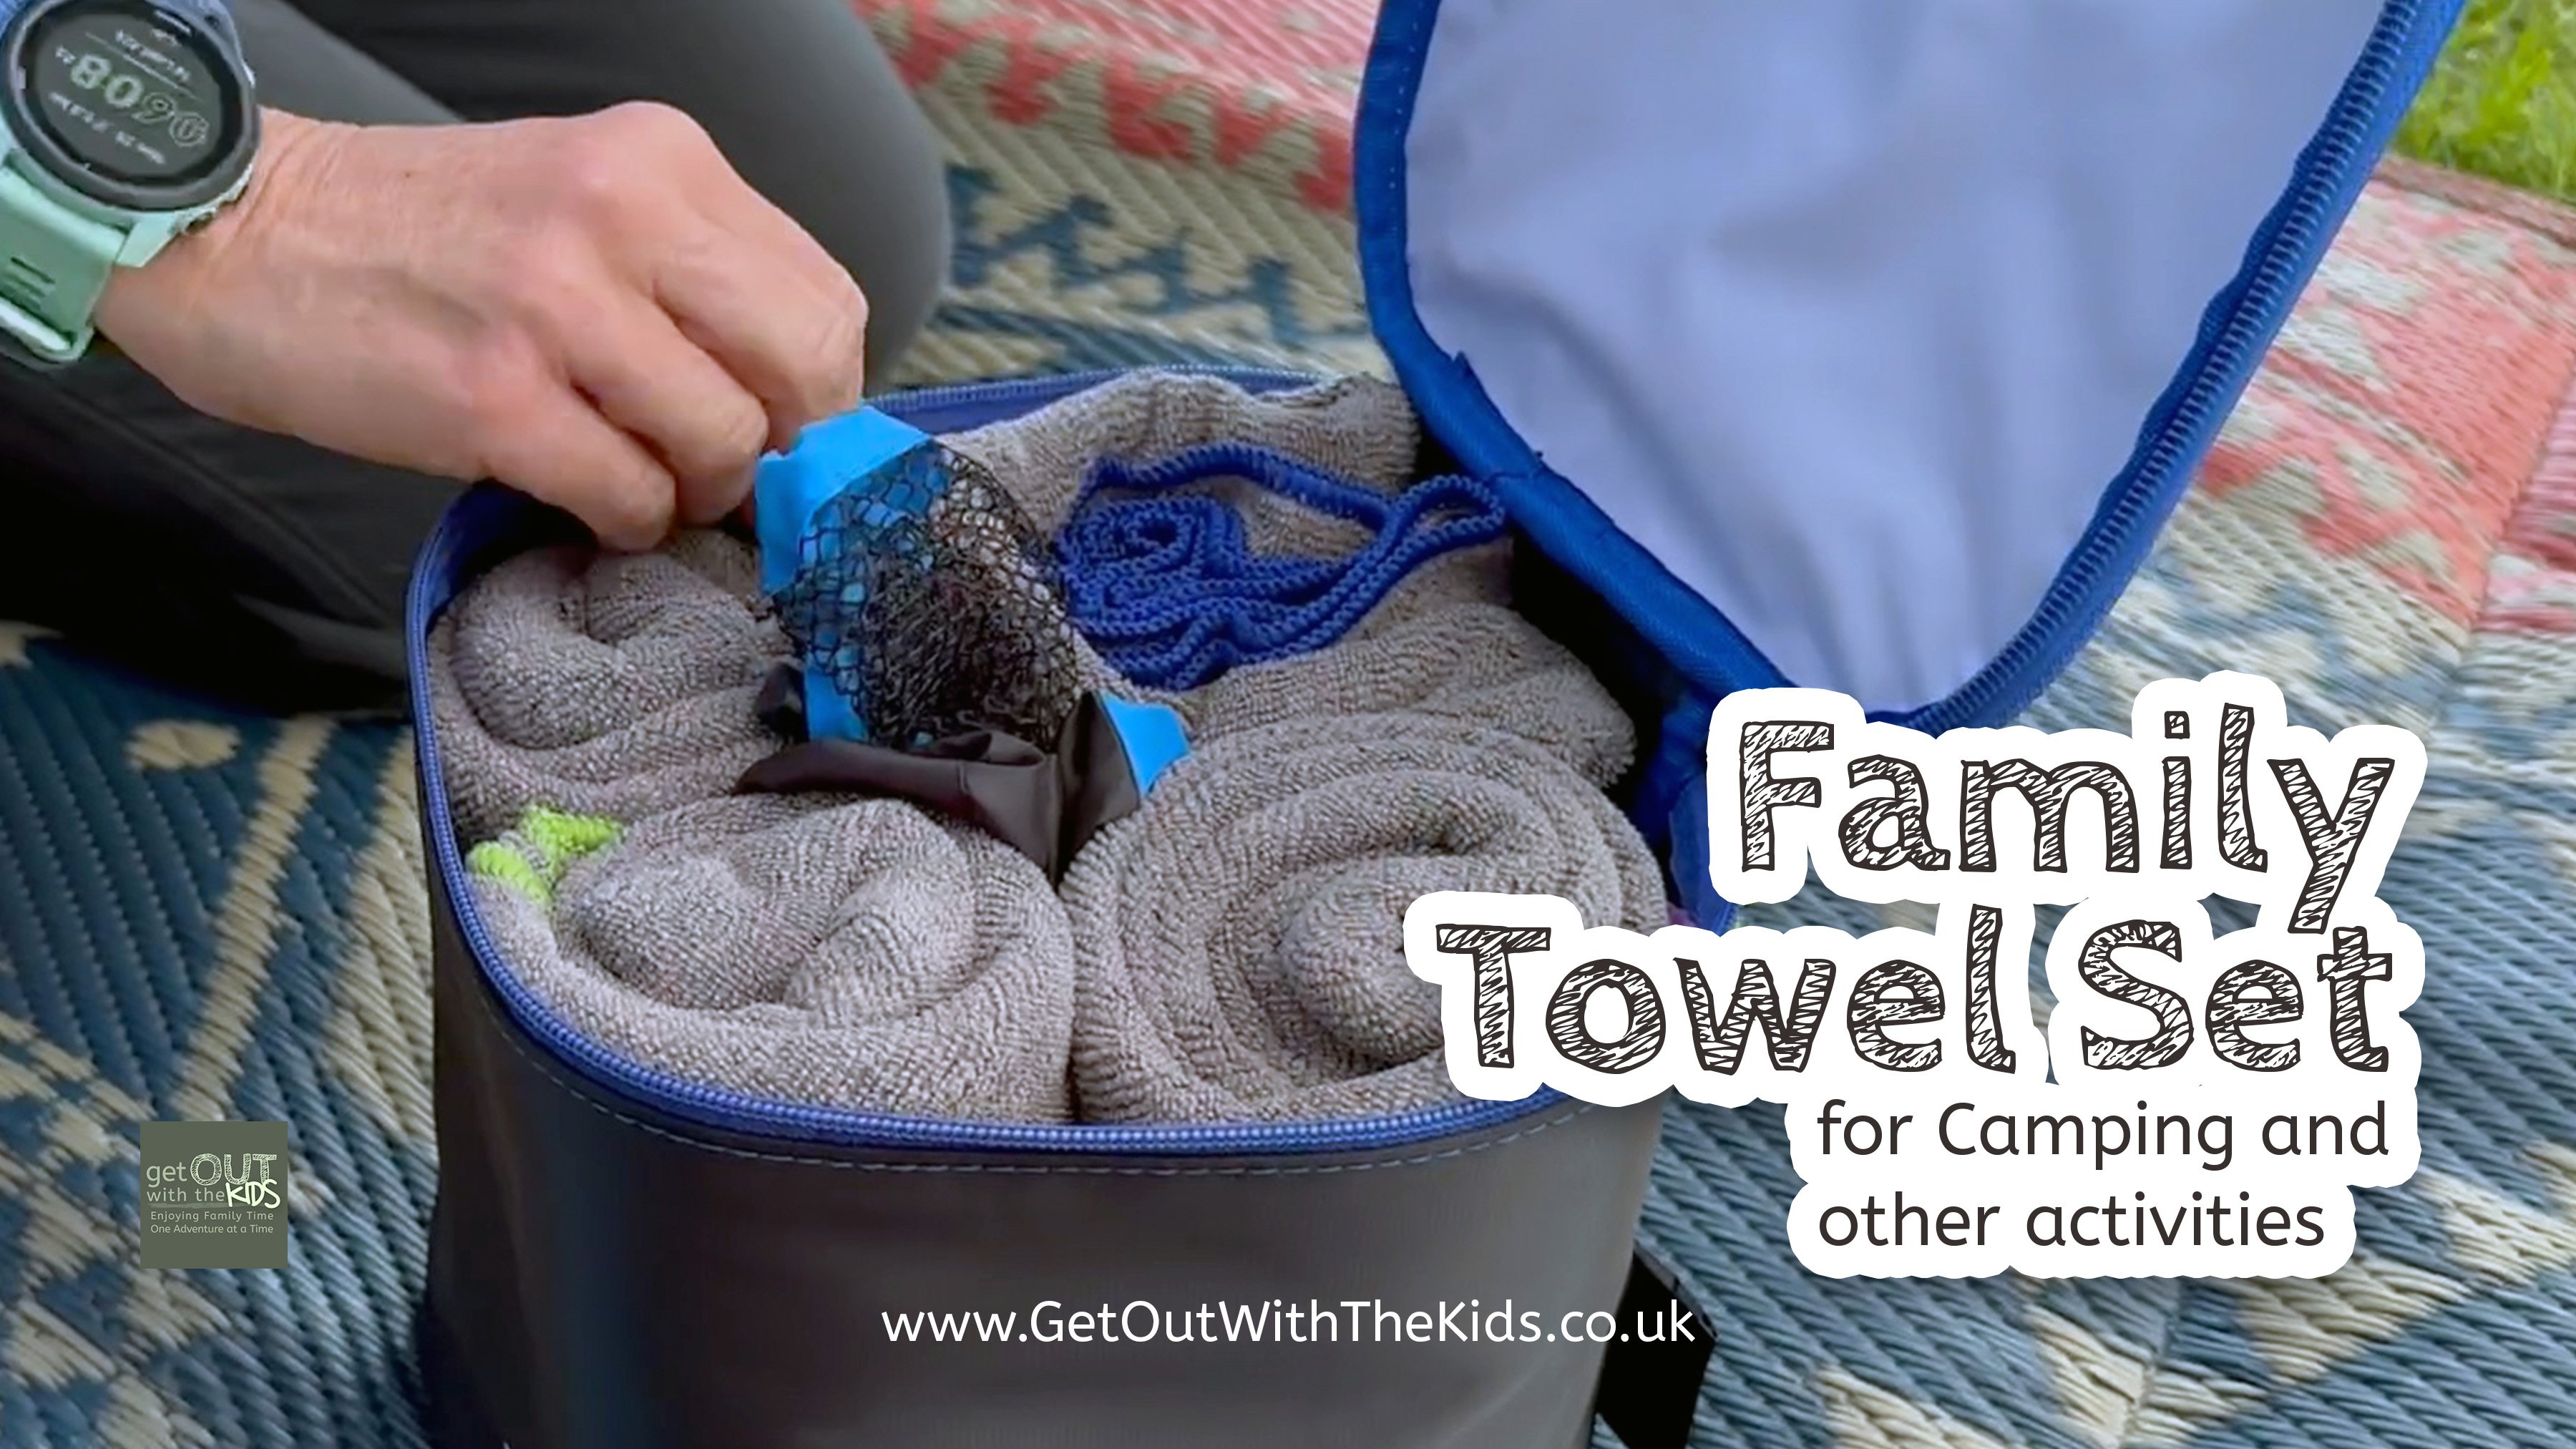 Four microfibre terry towels packed into a carry case